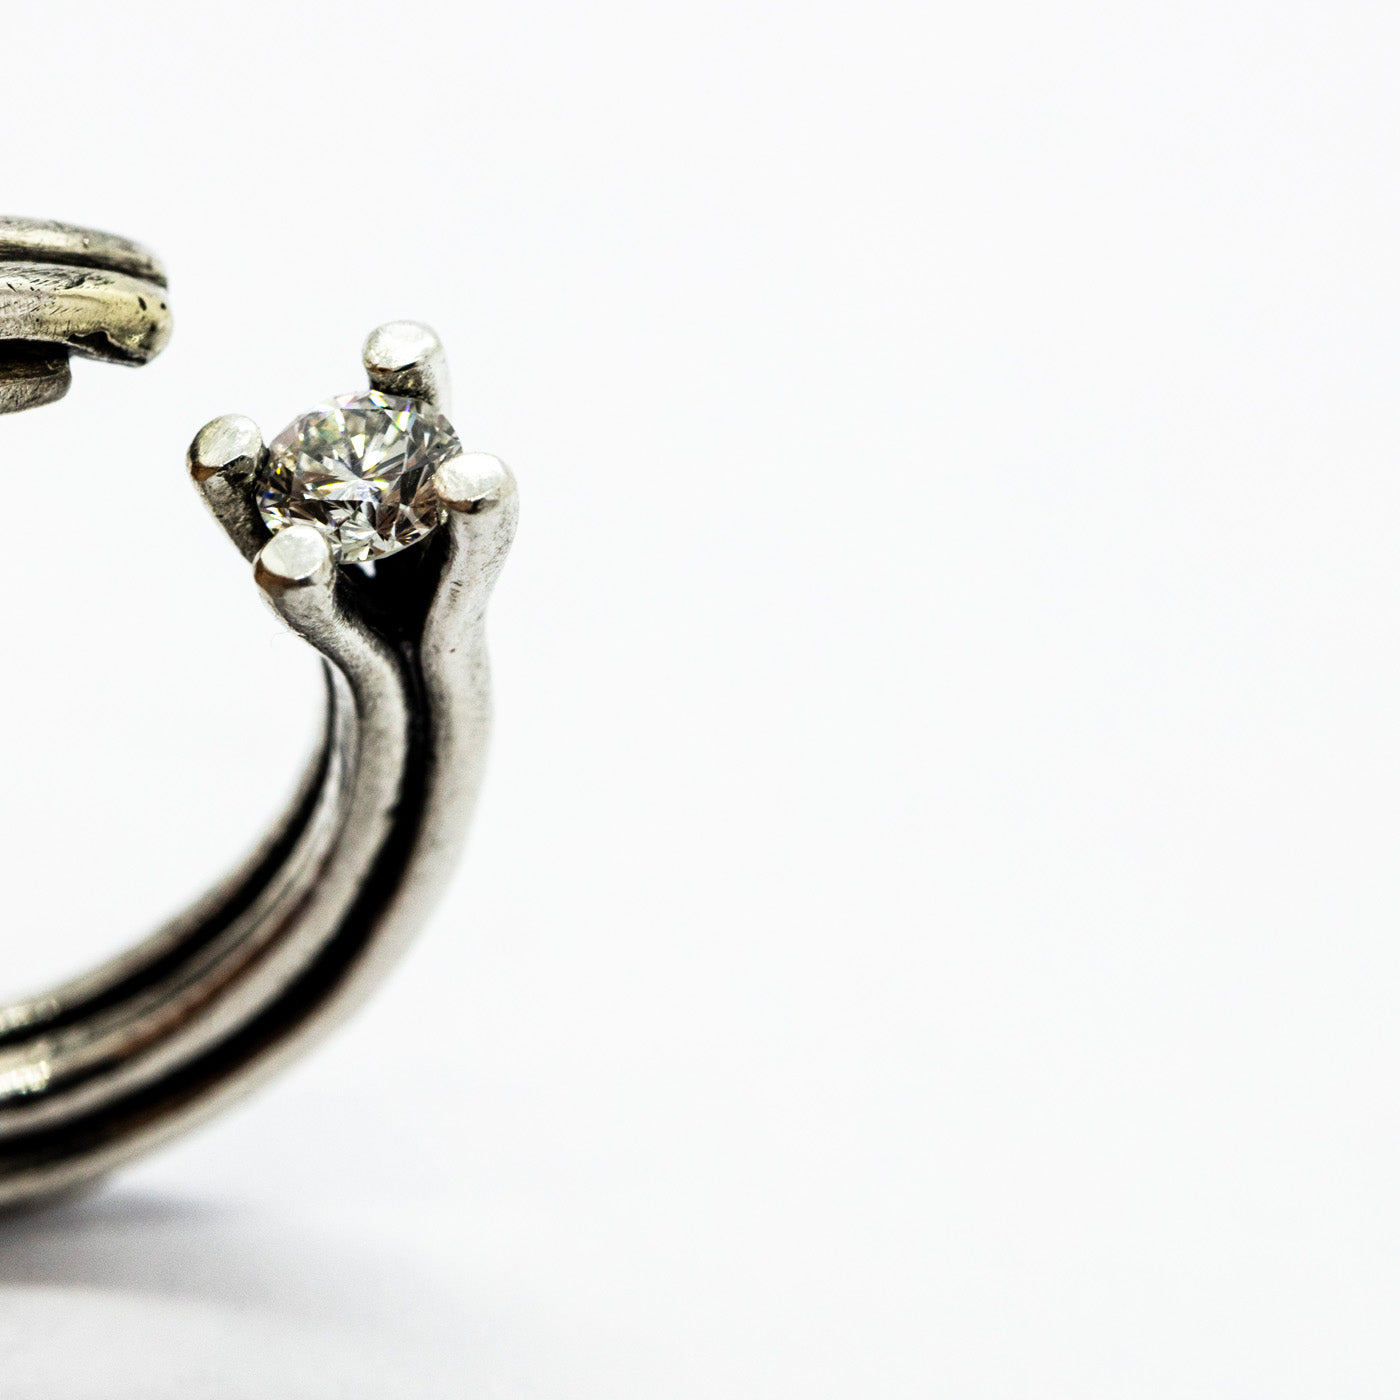 ring vortex silver 0.5ct white diamond front product view innan jewellery independent atelier berlin